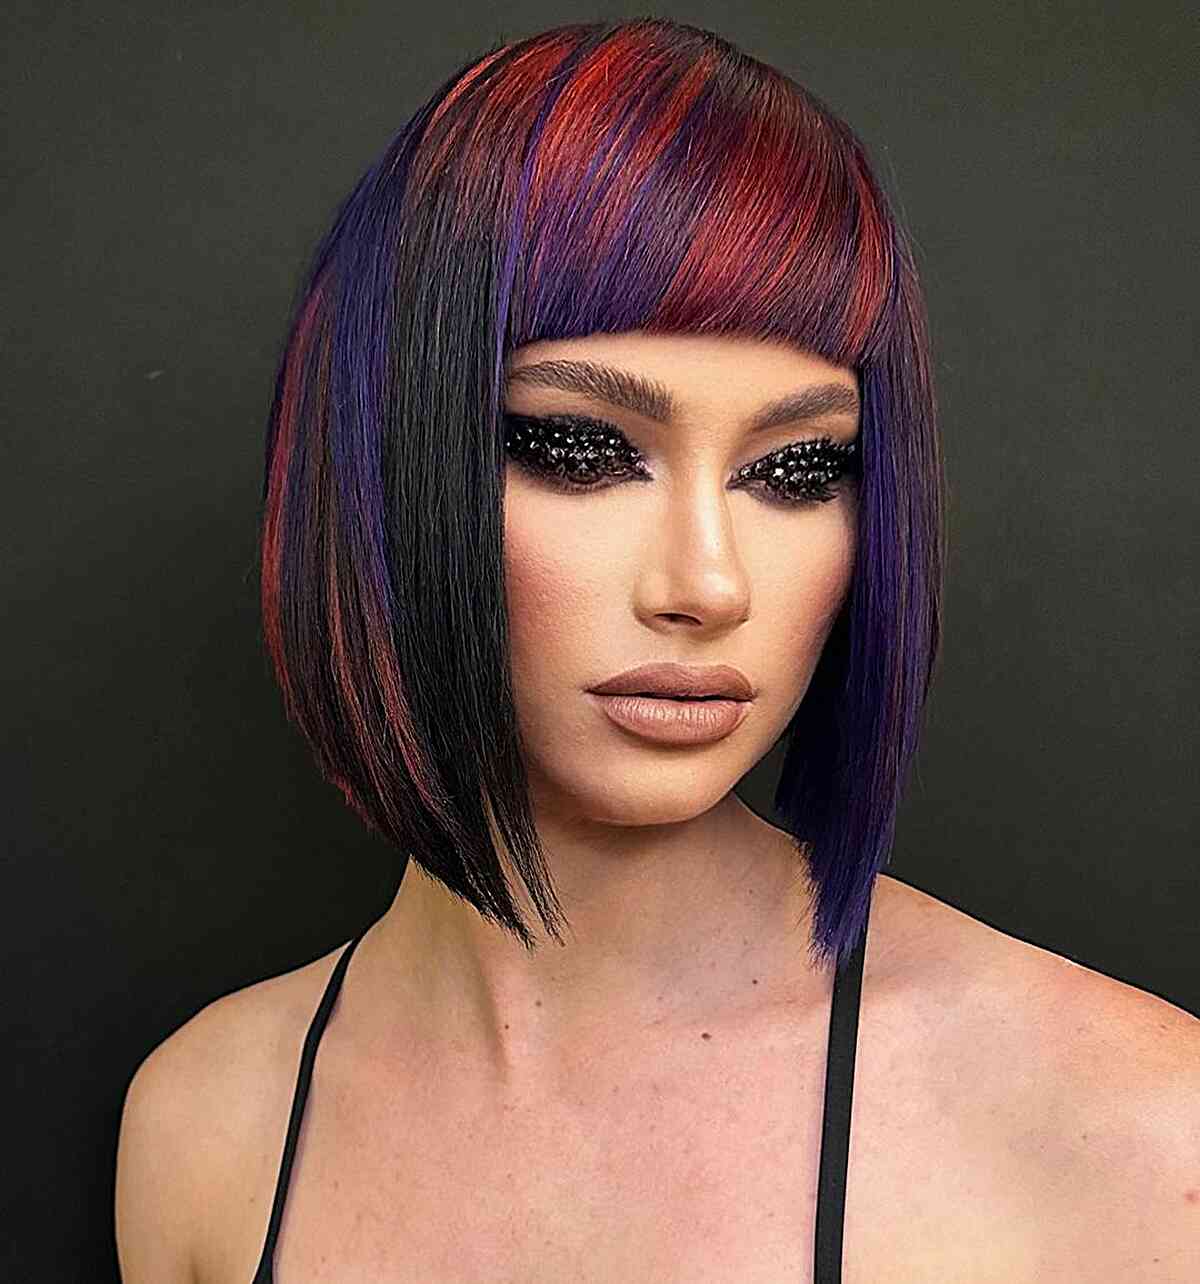 Black Slob Cut with Red and Purple Highlights for women with straight hair